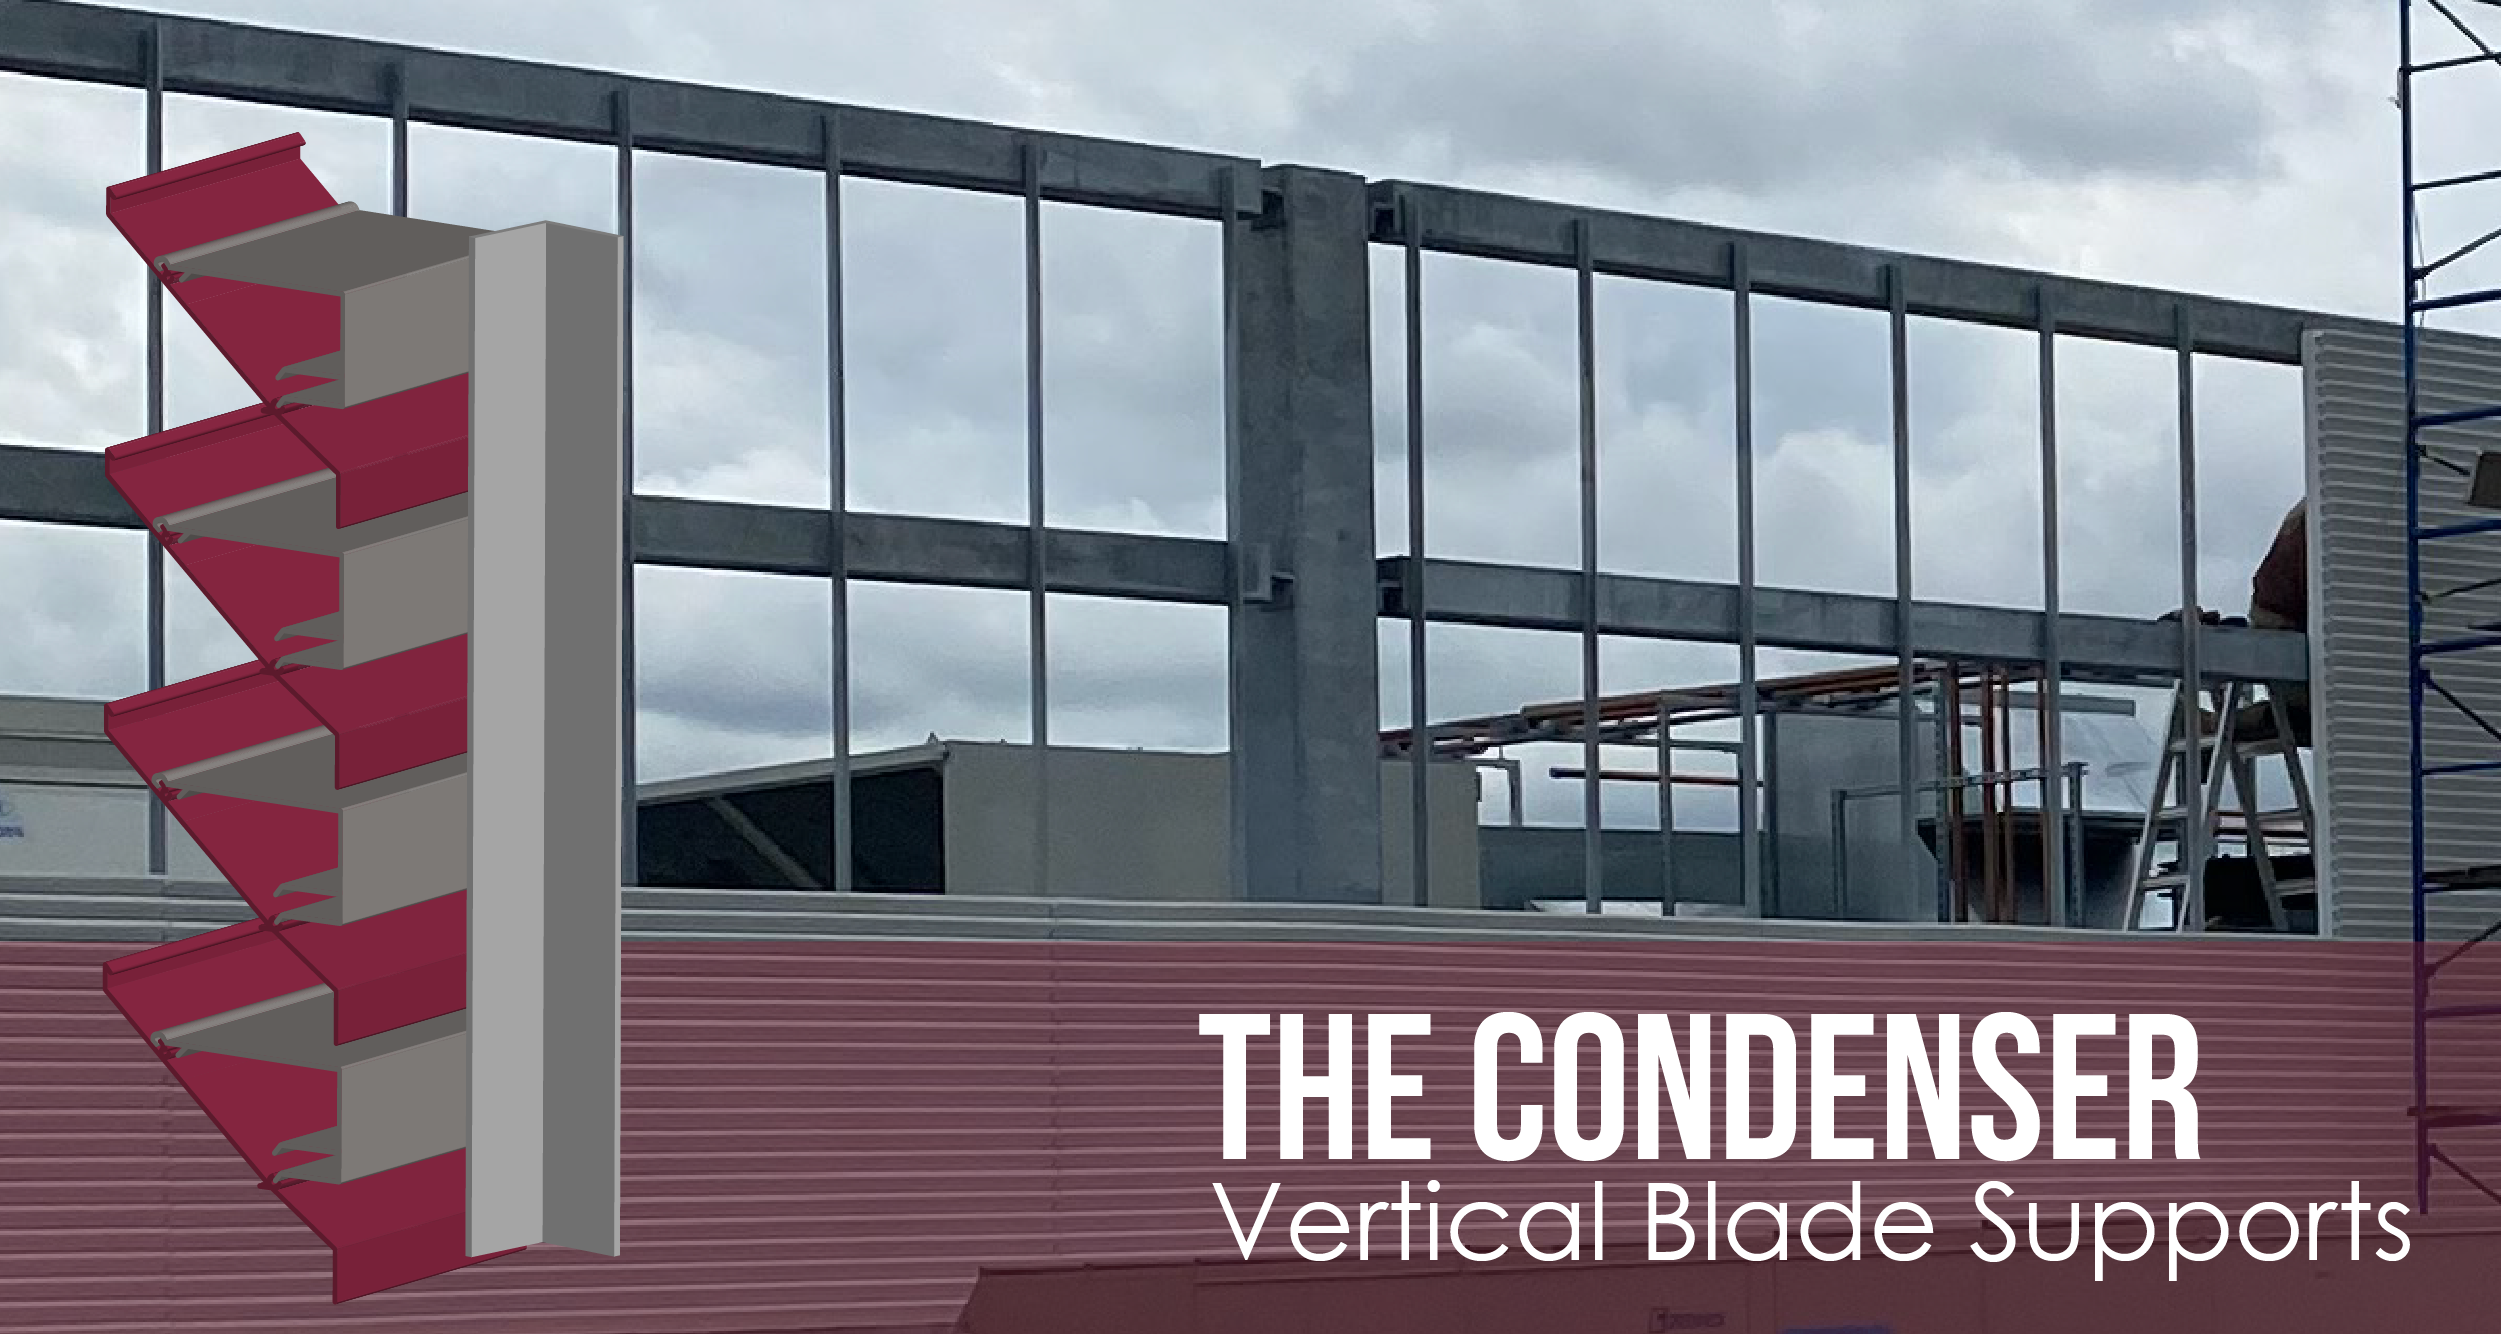 The Condenser - Vertical Blade Supports